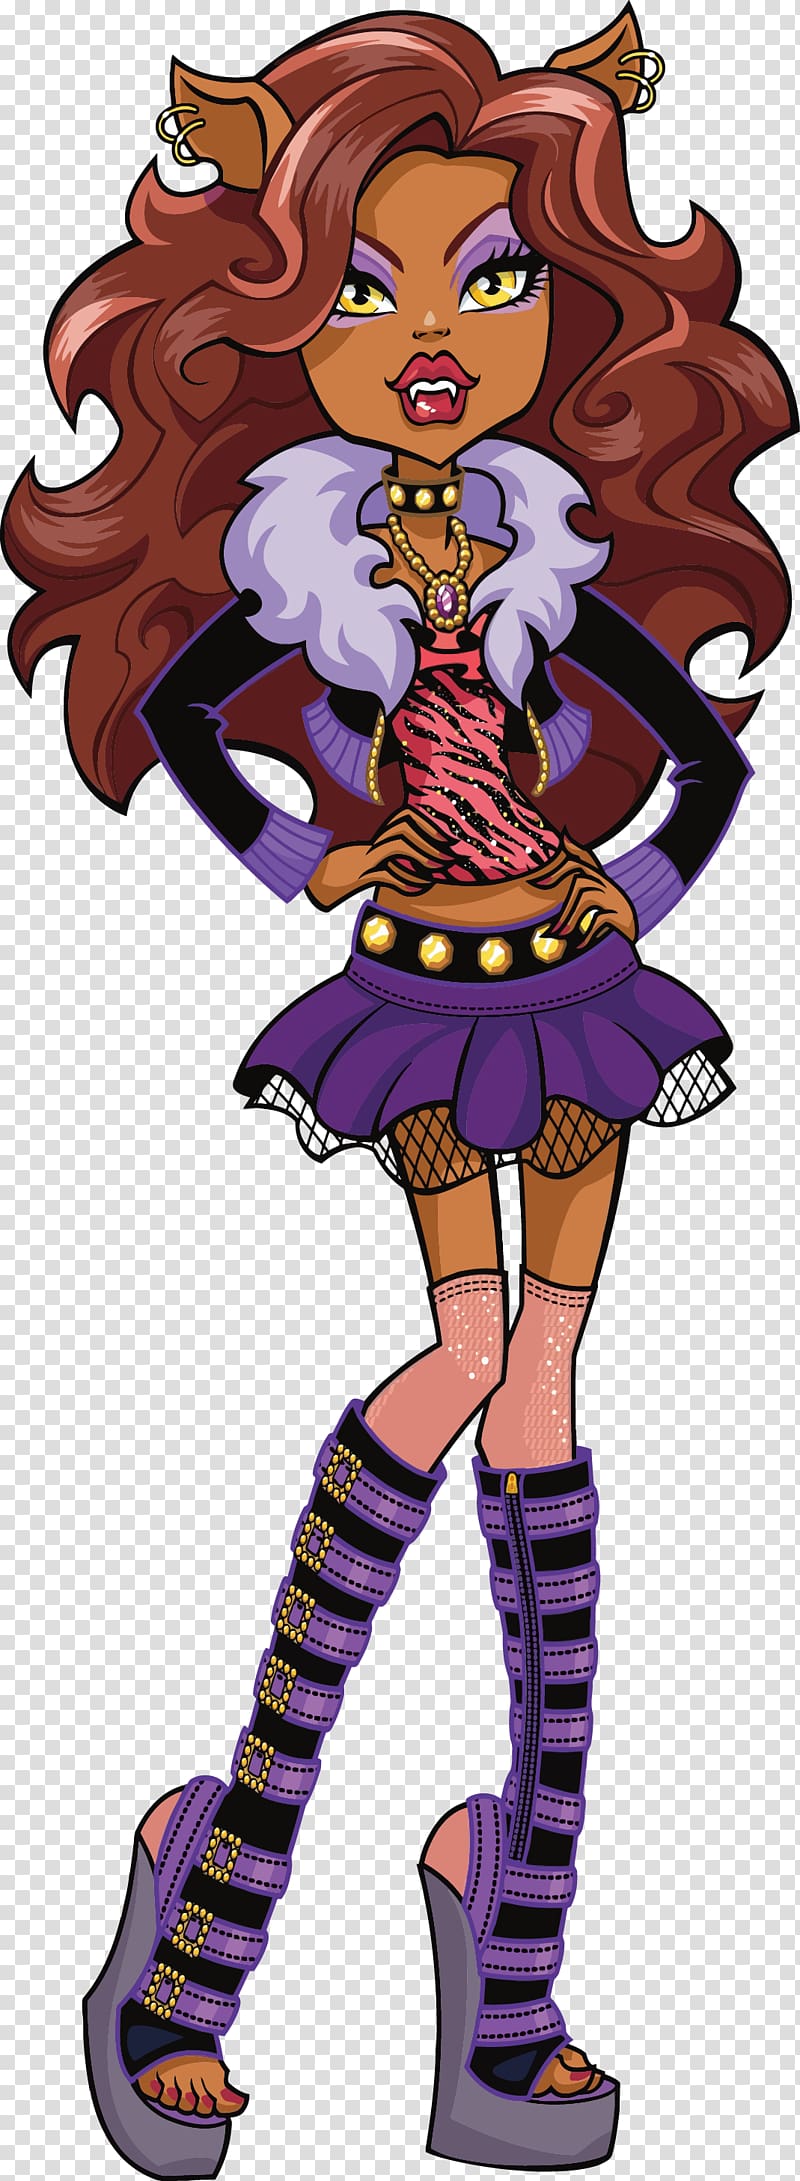 Monster High Clawdeen Wolf Doll Frankie Stein Monster High Clawdeen Wolf Doll, doll transparent background PNG clipart